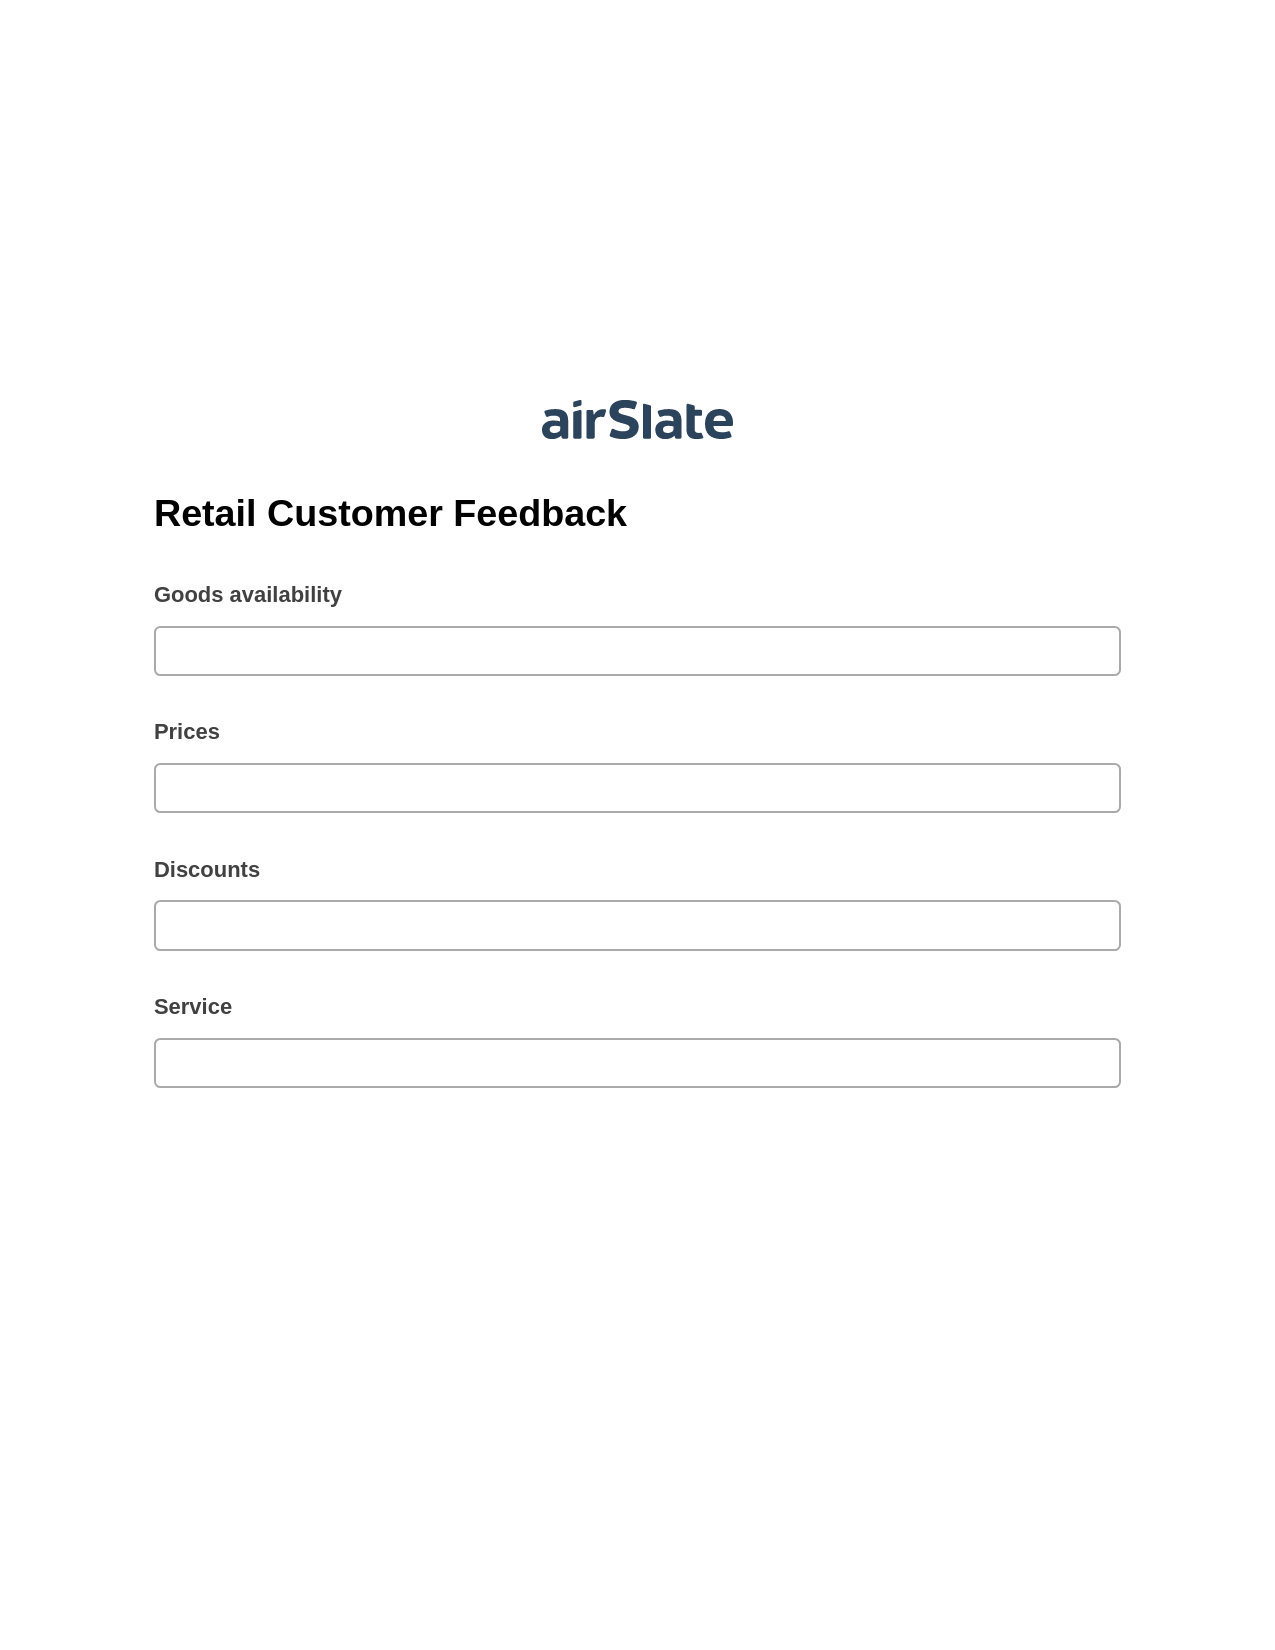 Retail Customer Feedback Pre-fill from CSV File Bot, Create slate addon, Export to Smartsheet